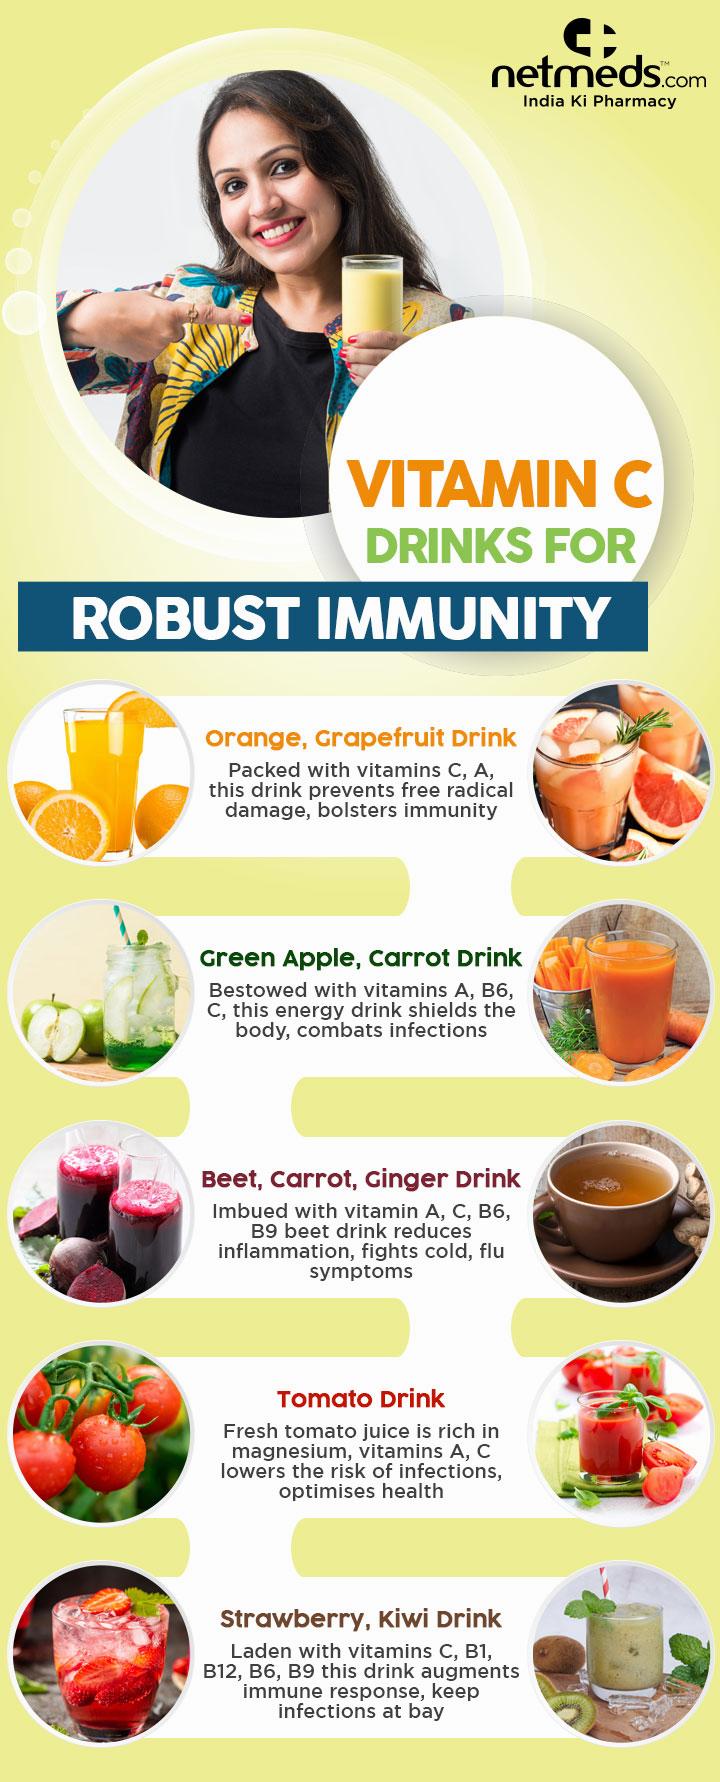 A colorful infographic shows a list of vitamin C rich drinks that can help boost immunity.